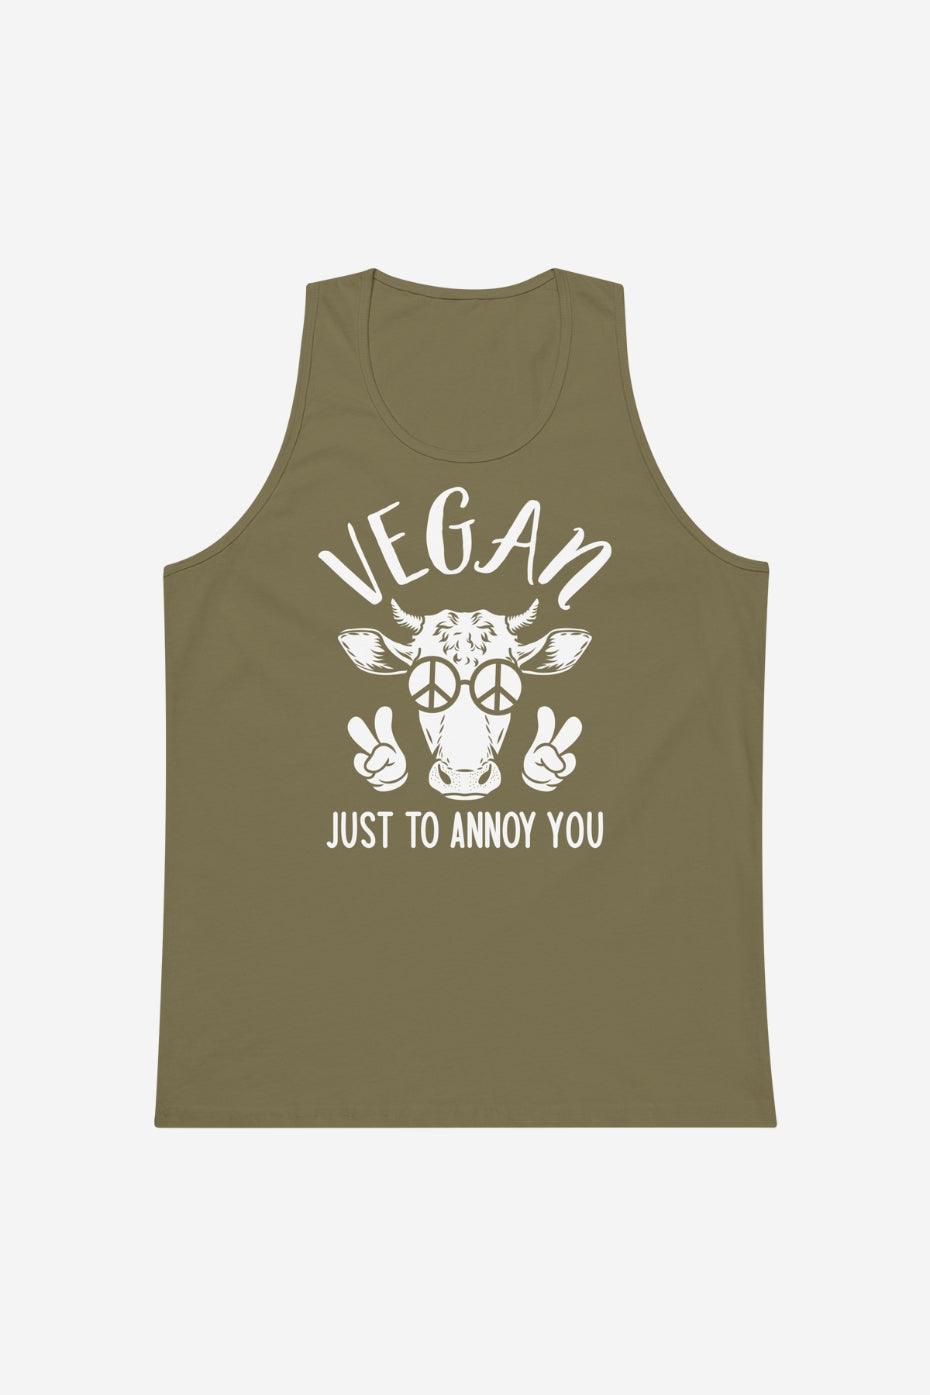 Just To Annoy You Men’s premium tank top